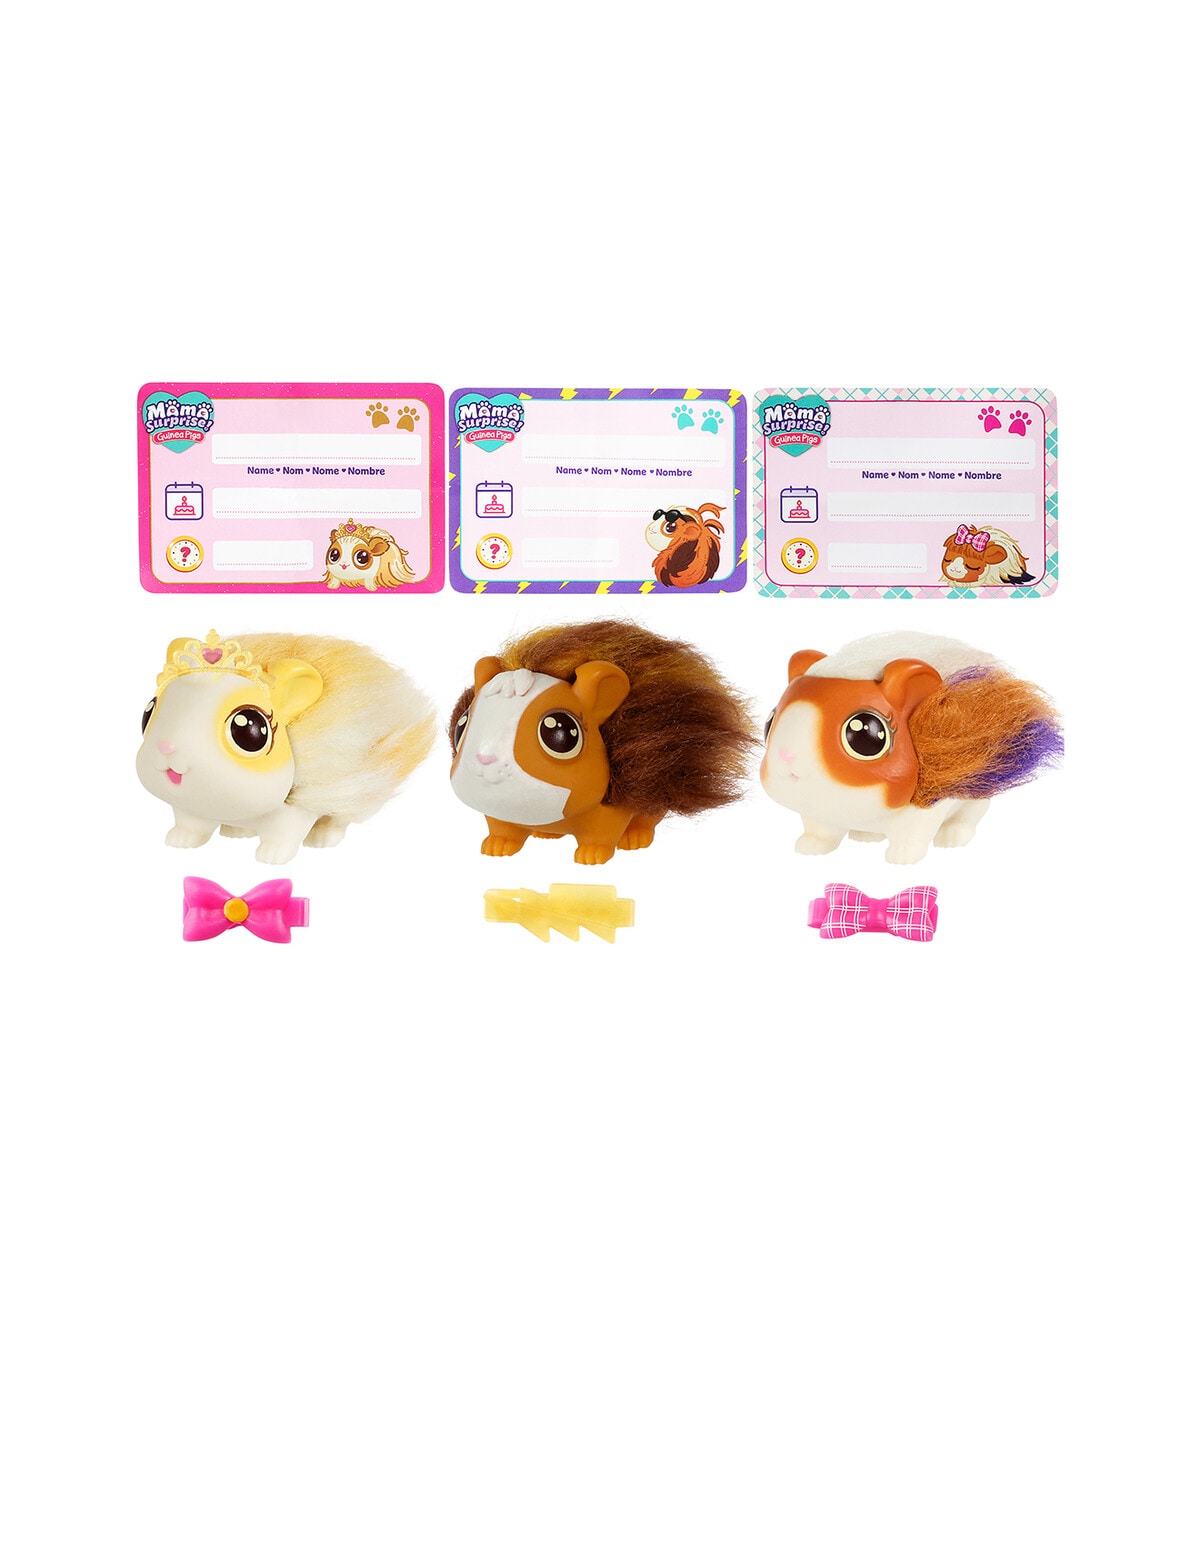 New Age Mama: Holiday Gift Guide - Littest Pet Shop Magic Playset